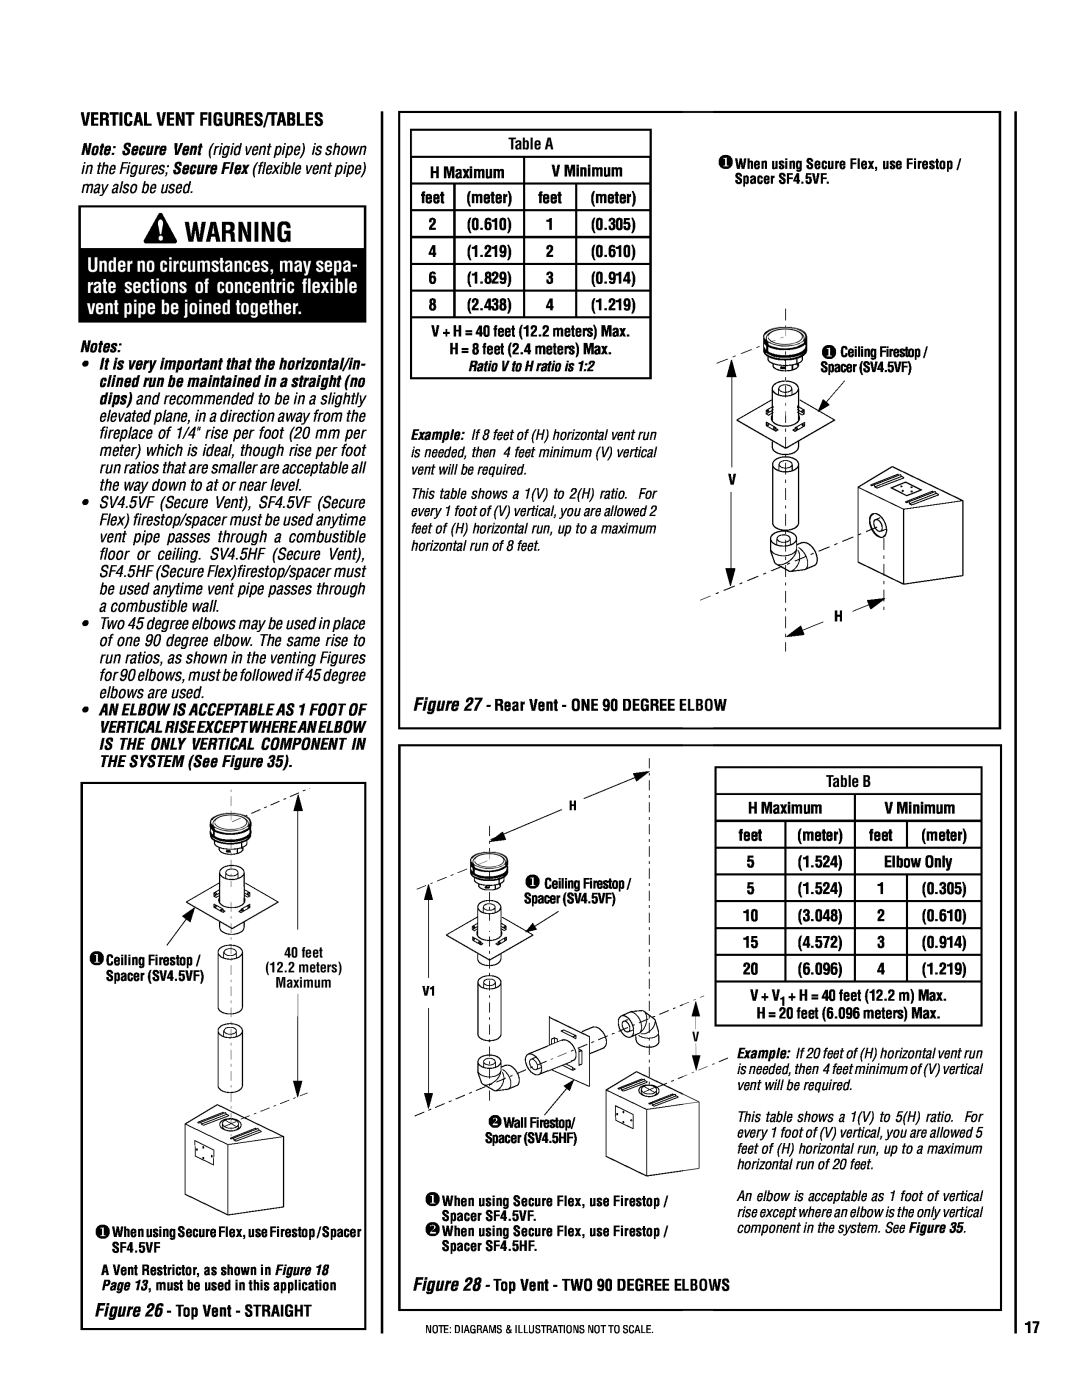 TOA Electronics SSDV-3328 installation instructions Vertical Vent Figures/Tables, Ratio V to H ratio is 